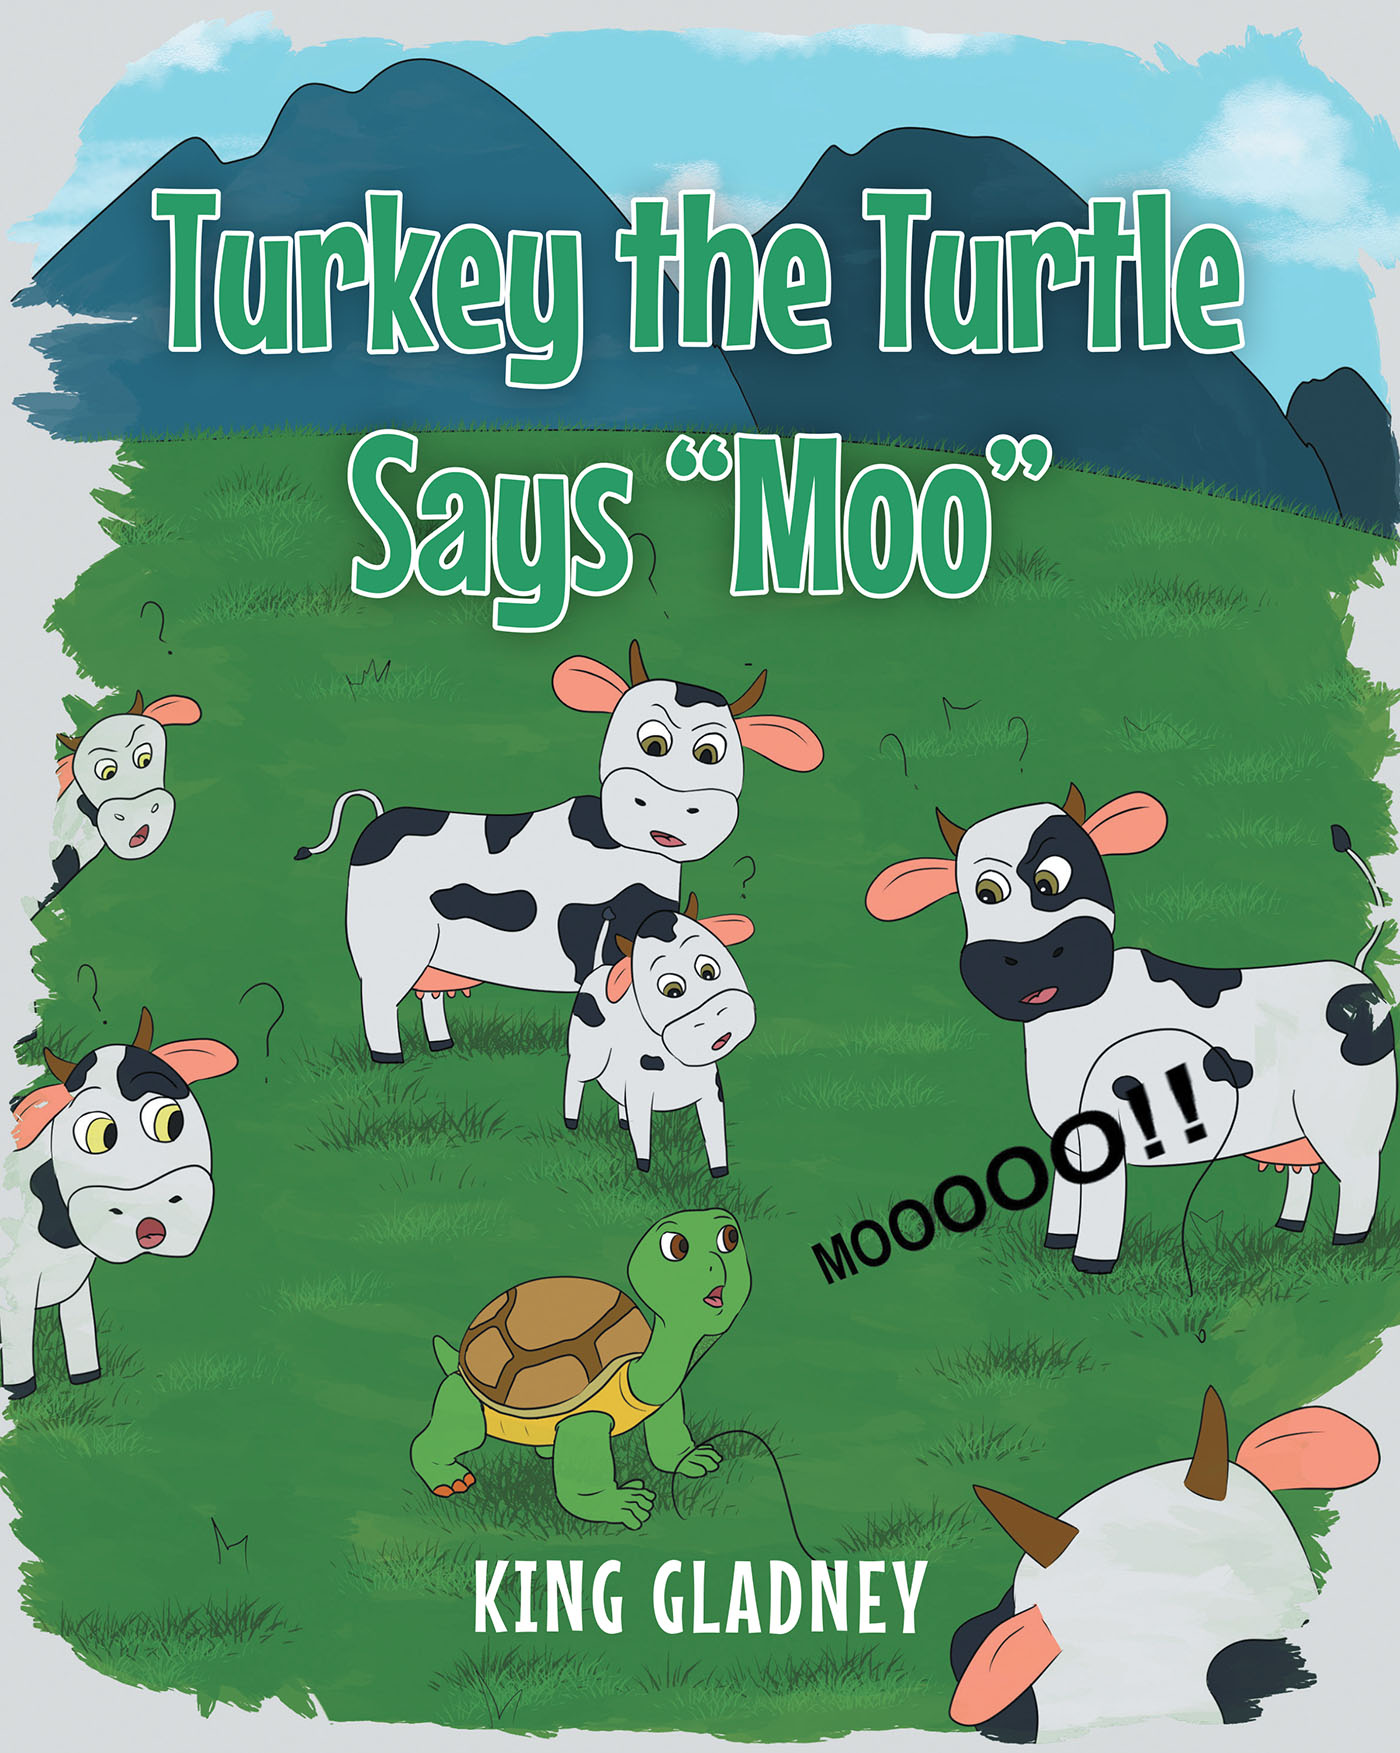 Author King Gladney’s New Book, "Turkey the Turtle Says ‘Moo,’" is a Delightful Tale That Follows a Turtle Who Longs to Fit in with the Other Animals on His Farm